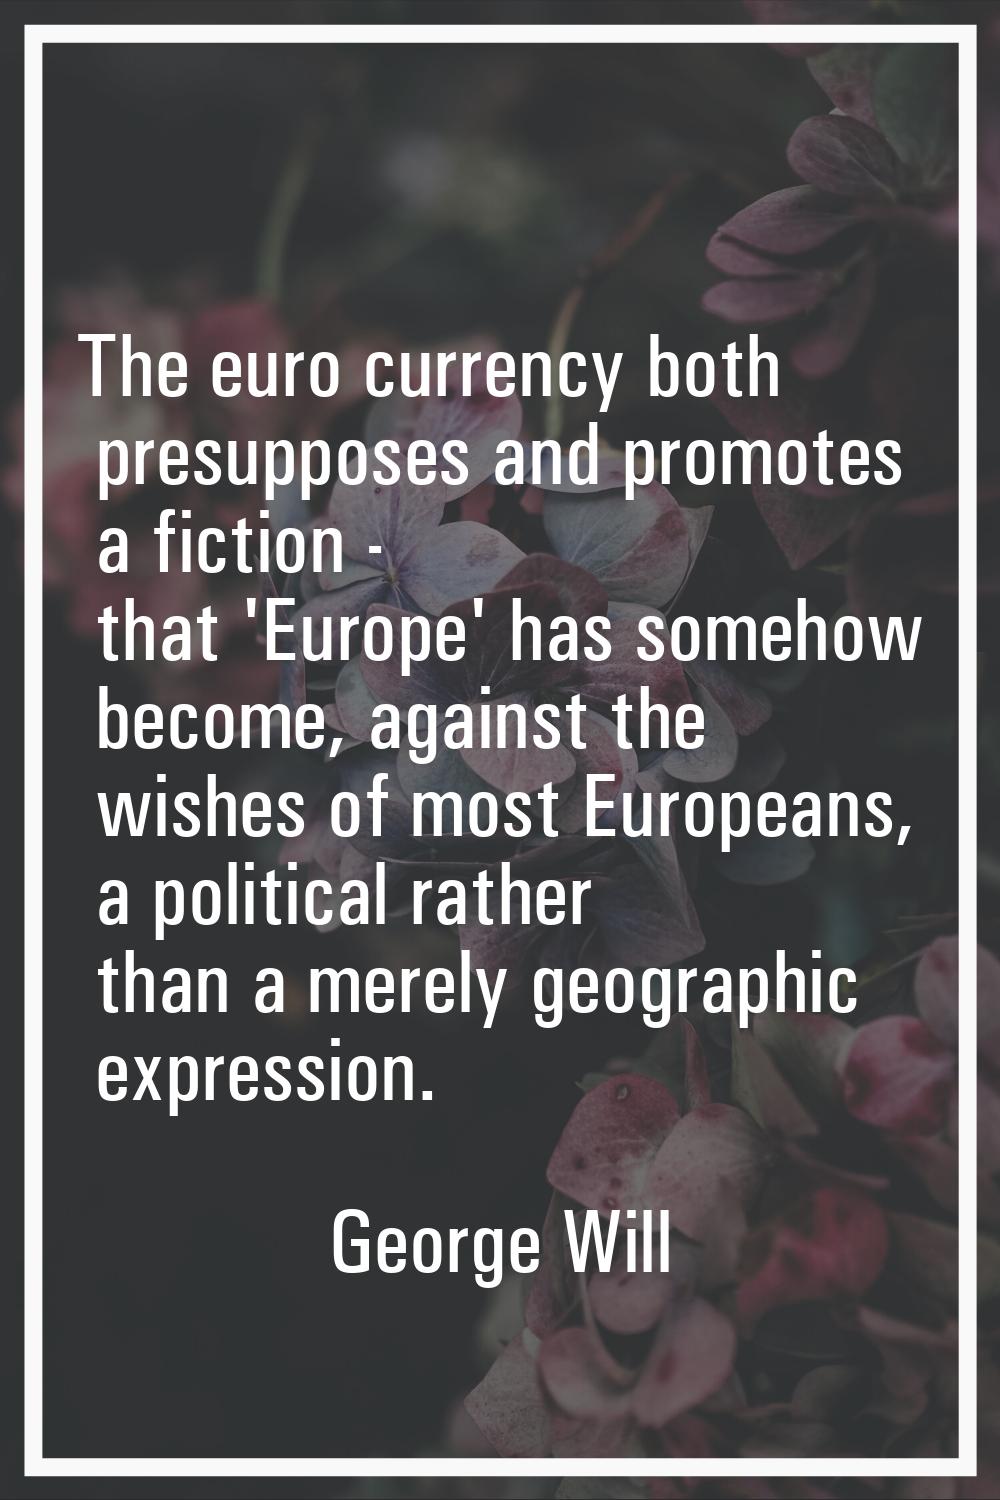 The euro currency both presupposes and promotes a fiction - that 'Europe' has somehow become, again